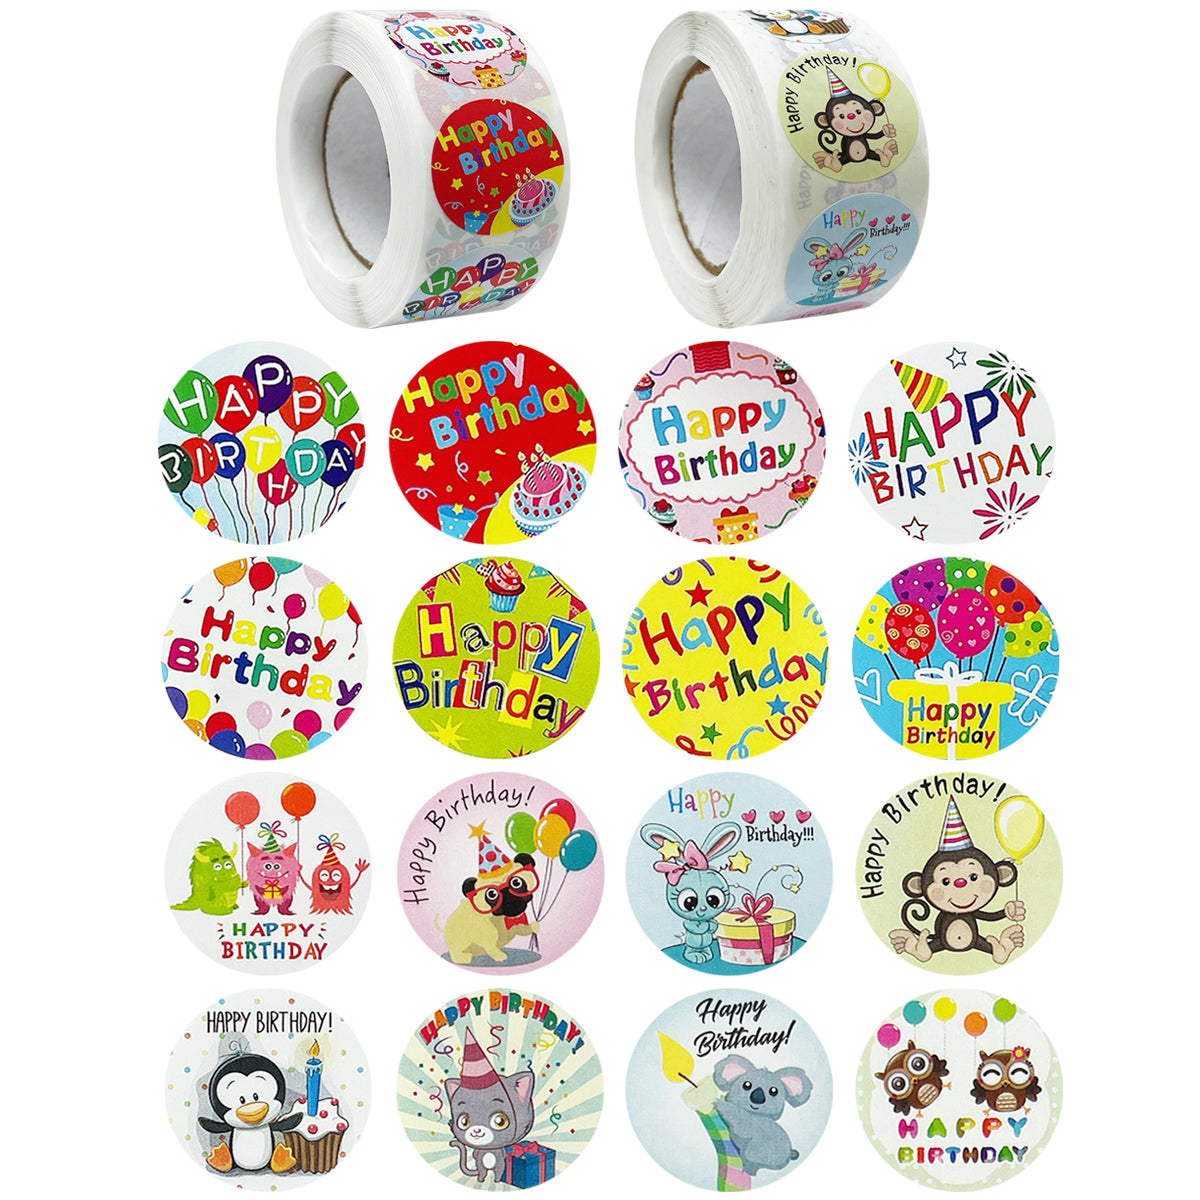 Wrapables 1 inch Reward, Birthday, Thank You Stickers for Teachers, Students, Classrooms, Party Favors, Gifts, Boxes & Bags (1000pcs) Happy Birthday